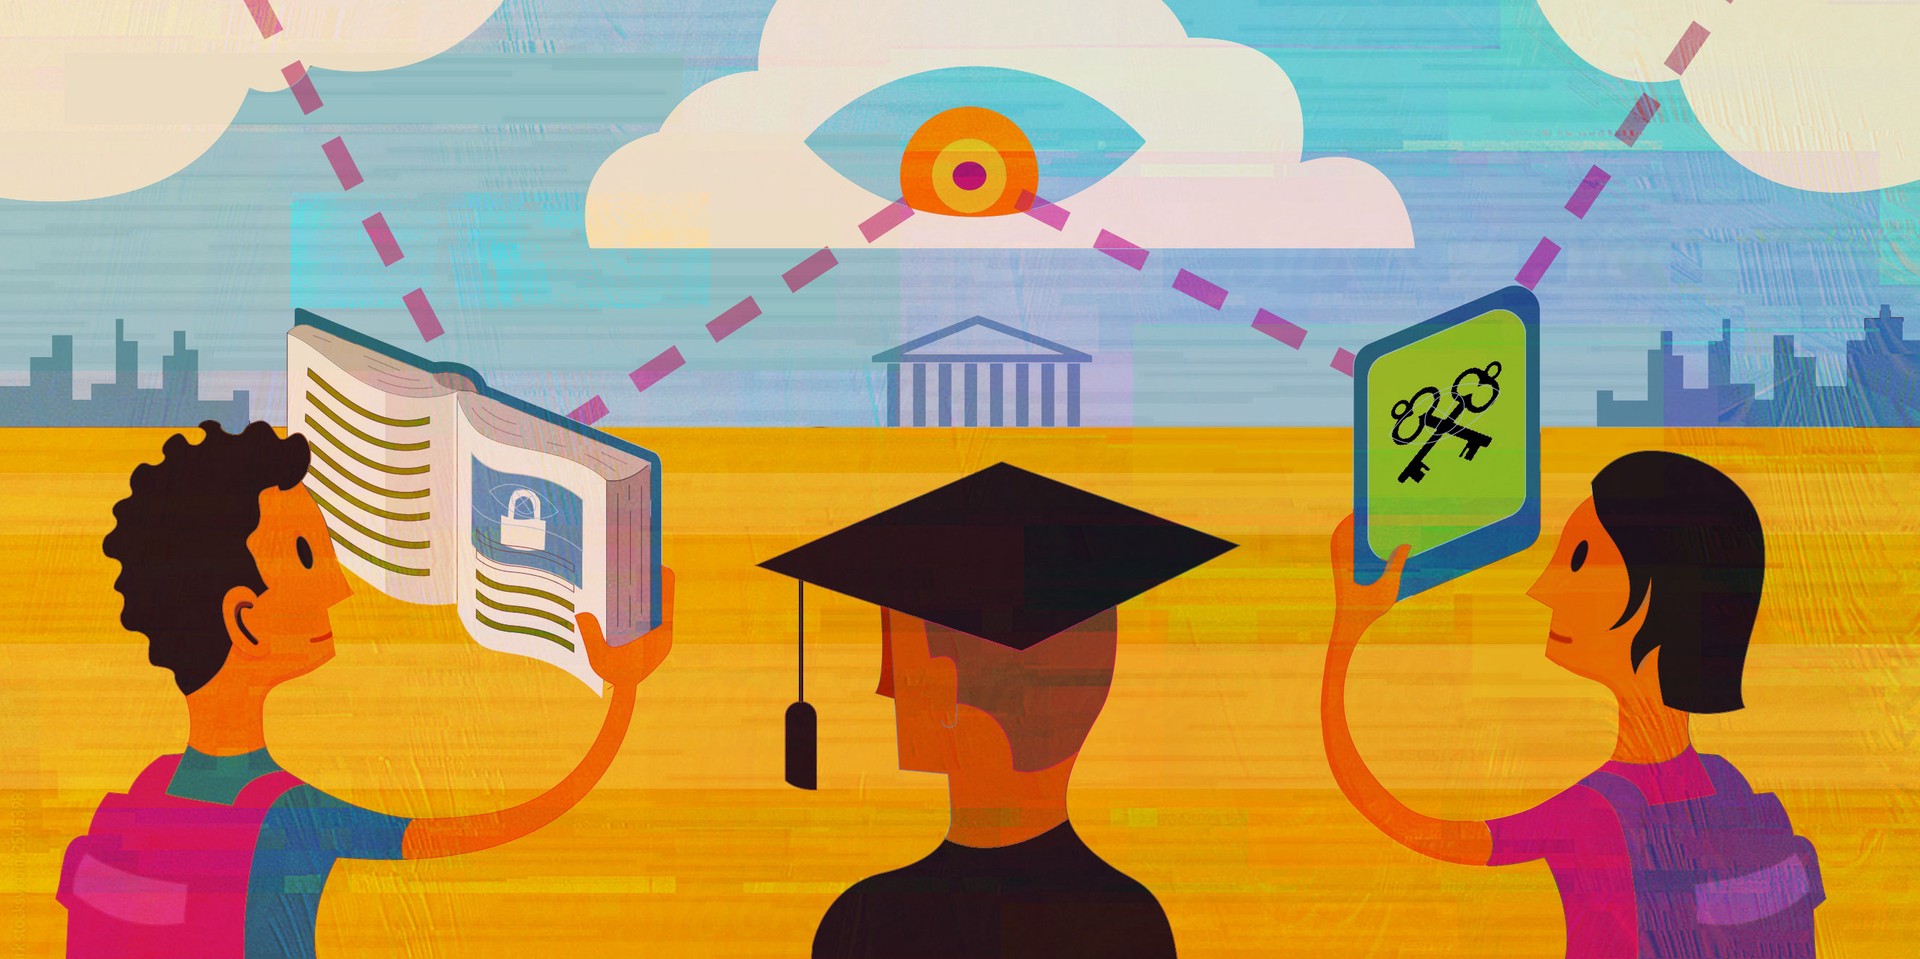 illustration of eye in a cloud in the sky looking at student's books and tablets